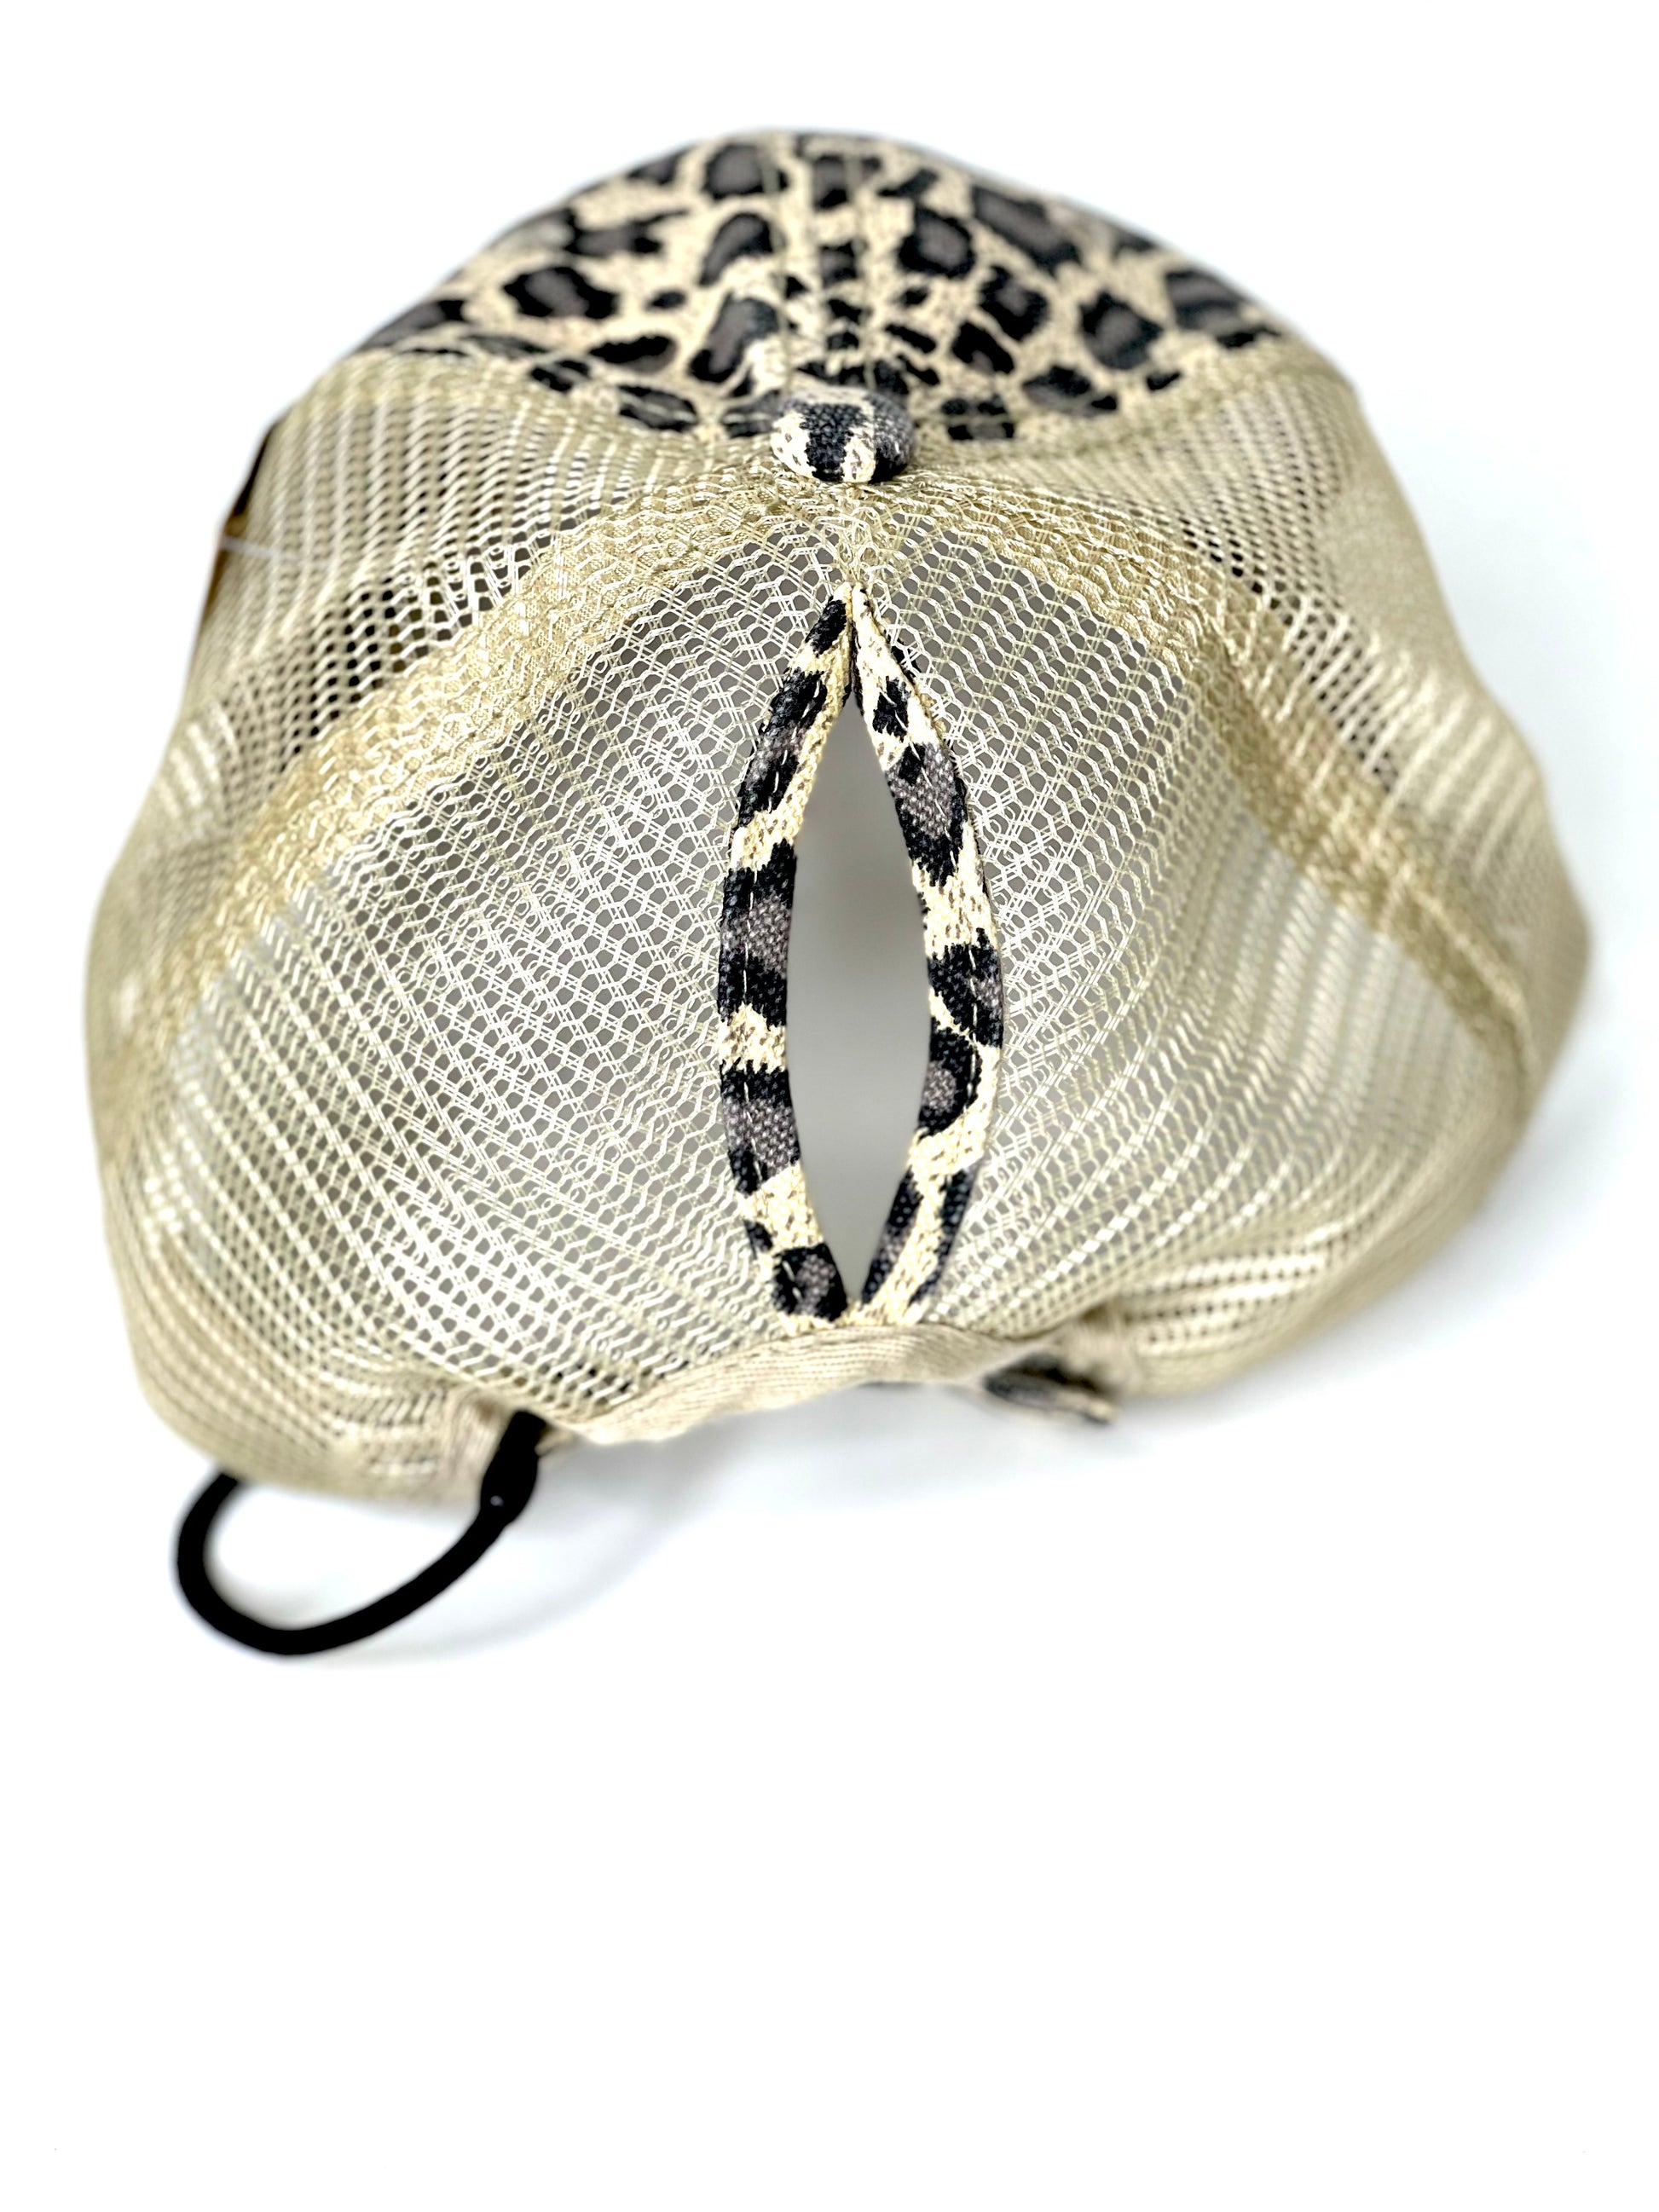 F2 - Cream Leopard Ponytail Trucker Hat Cream Mesh Black/Gold - Patches Of Upcycling